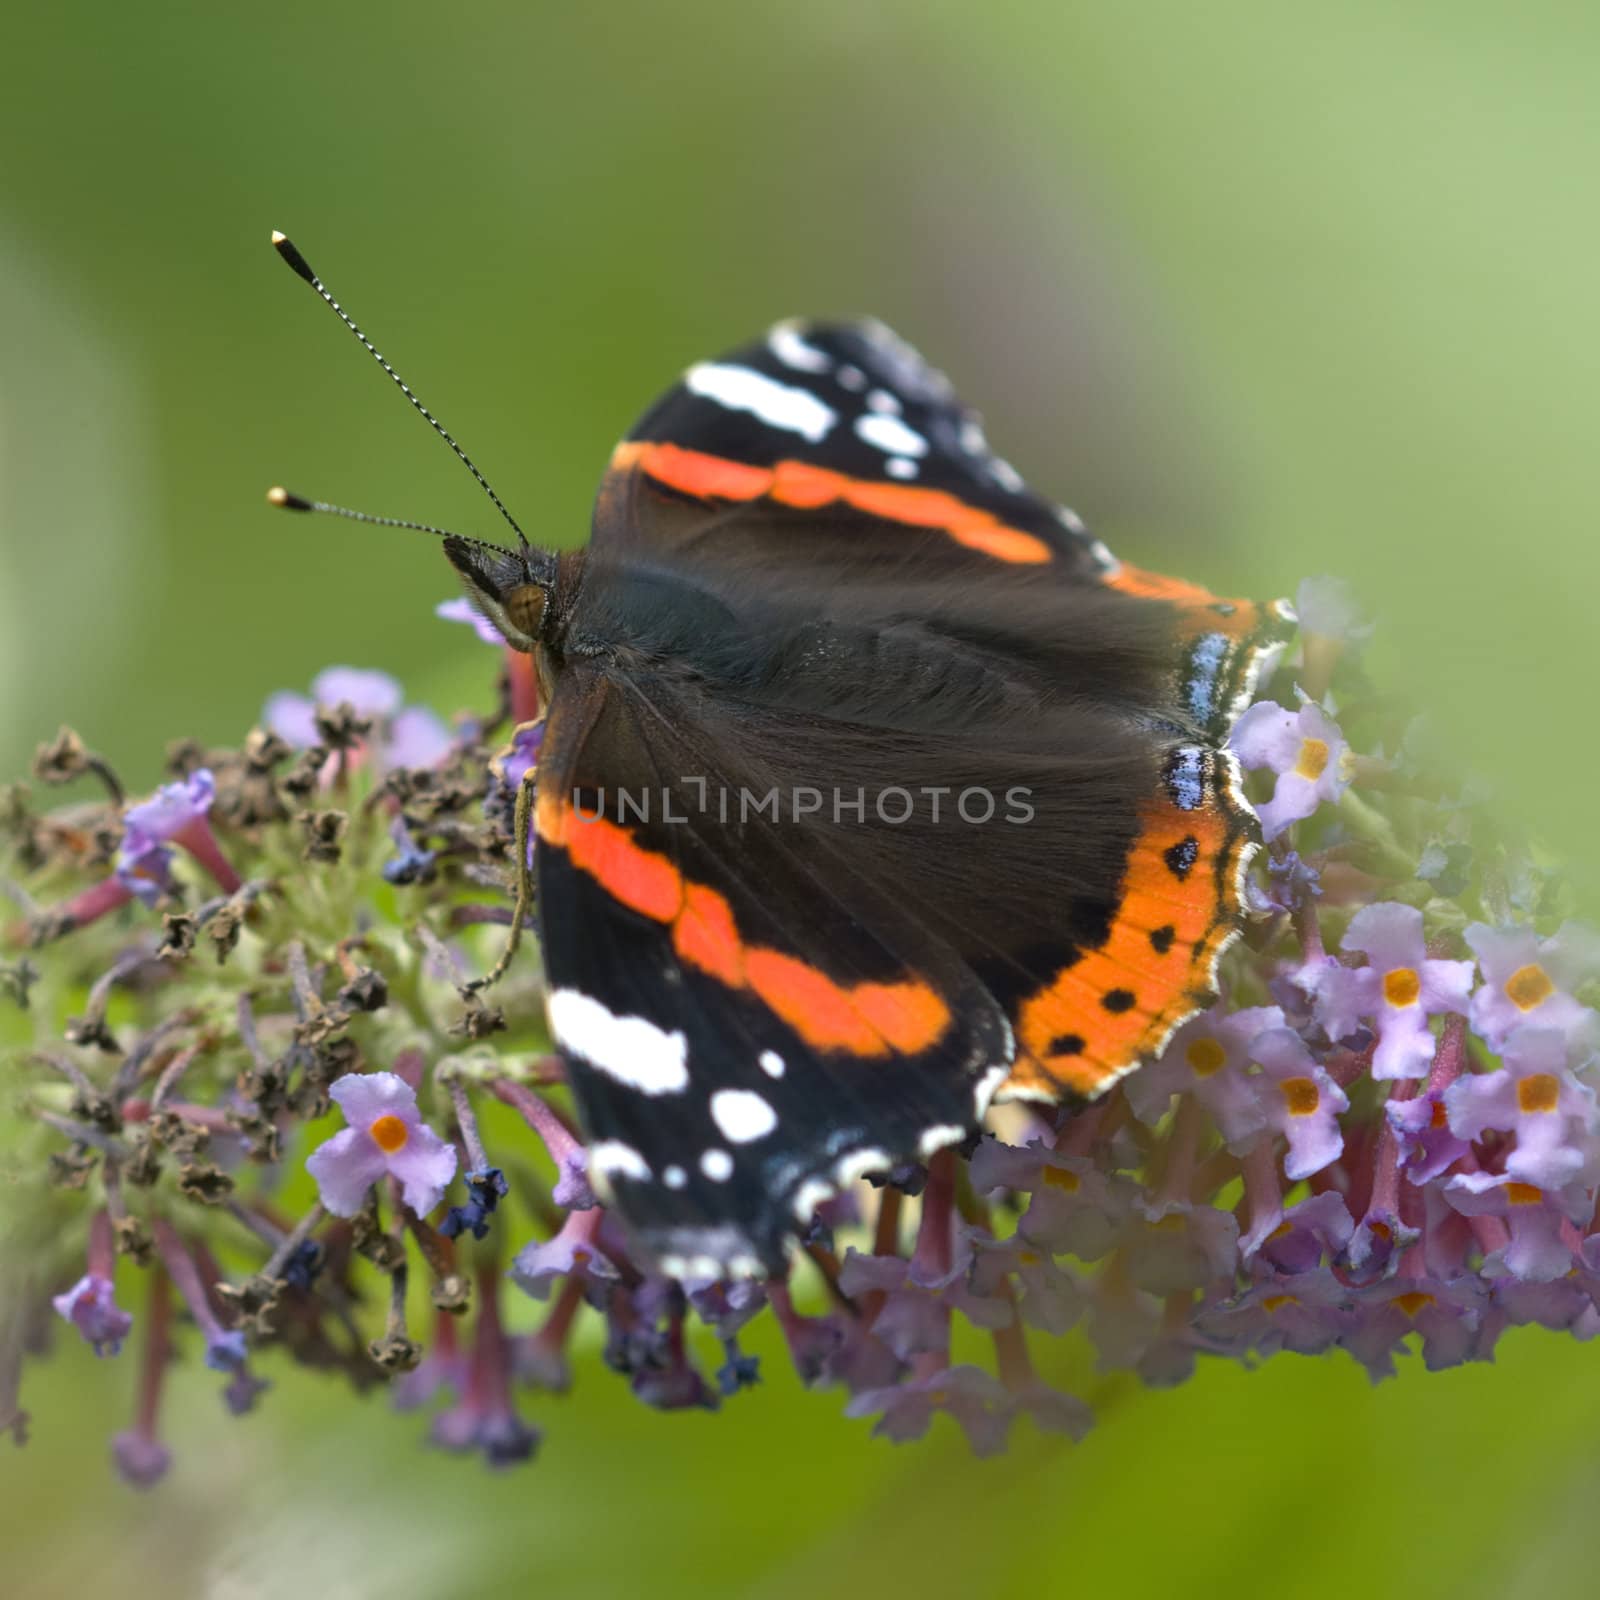 Red admiral butterfly, Vanessa atalanta, on Bluddleia flowers